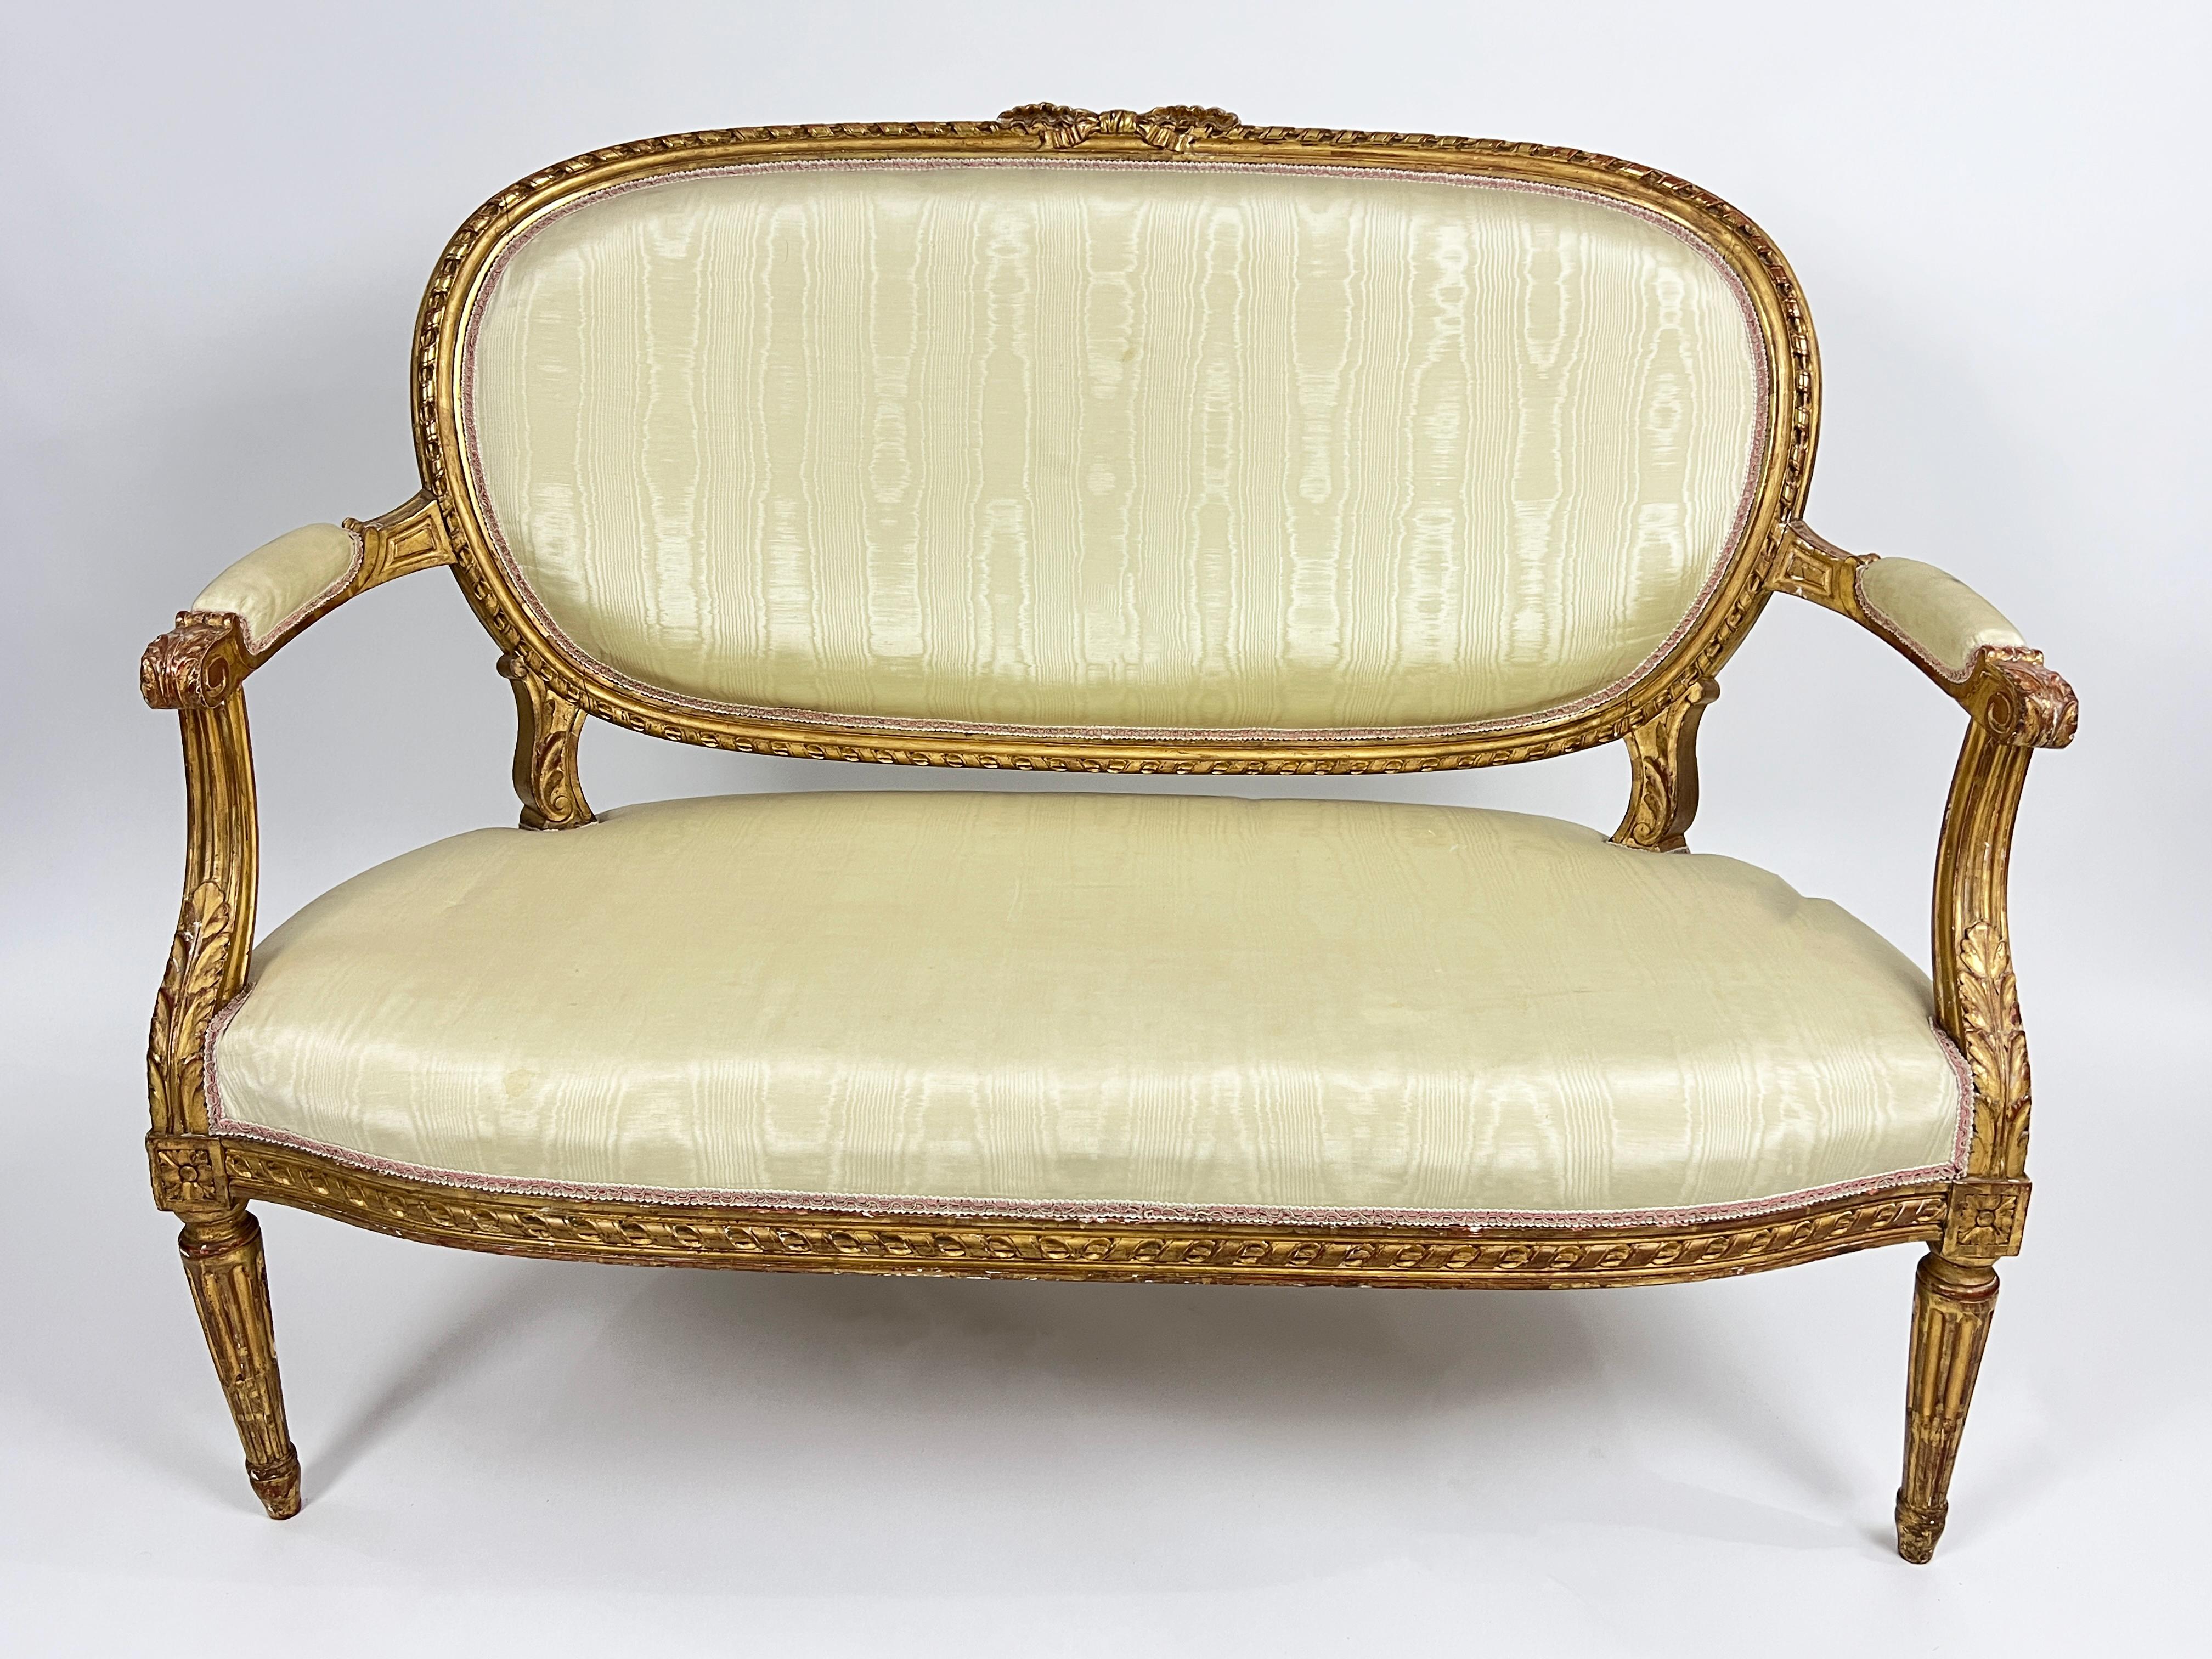 A fine 19th century salon suite comprising a canapé / sofa and four fauteuils / open armchairs, each with a rope-twist carved frame, oval padded back, arms and seat covered in white silky upholstery, on stop-fluted tapering legs. 

Dimensions: